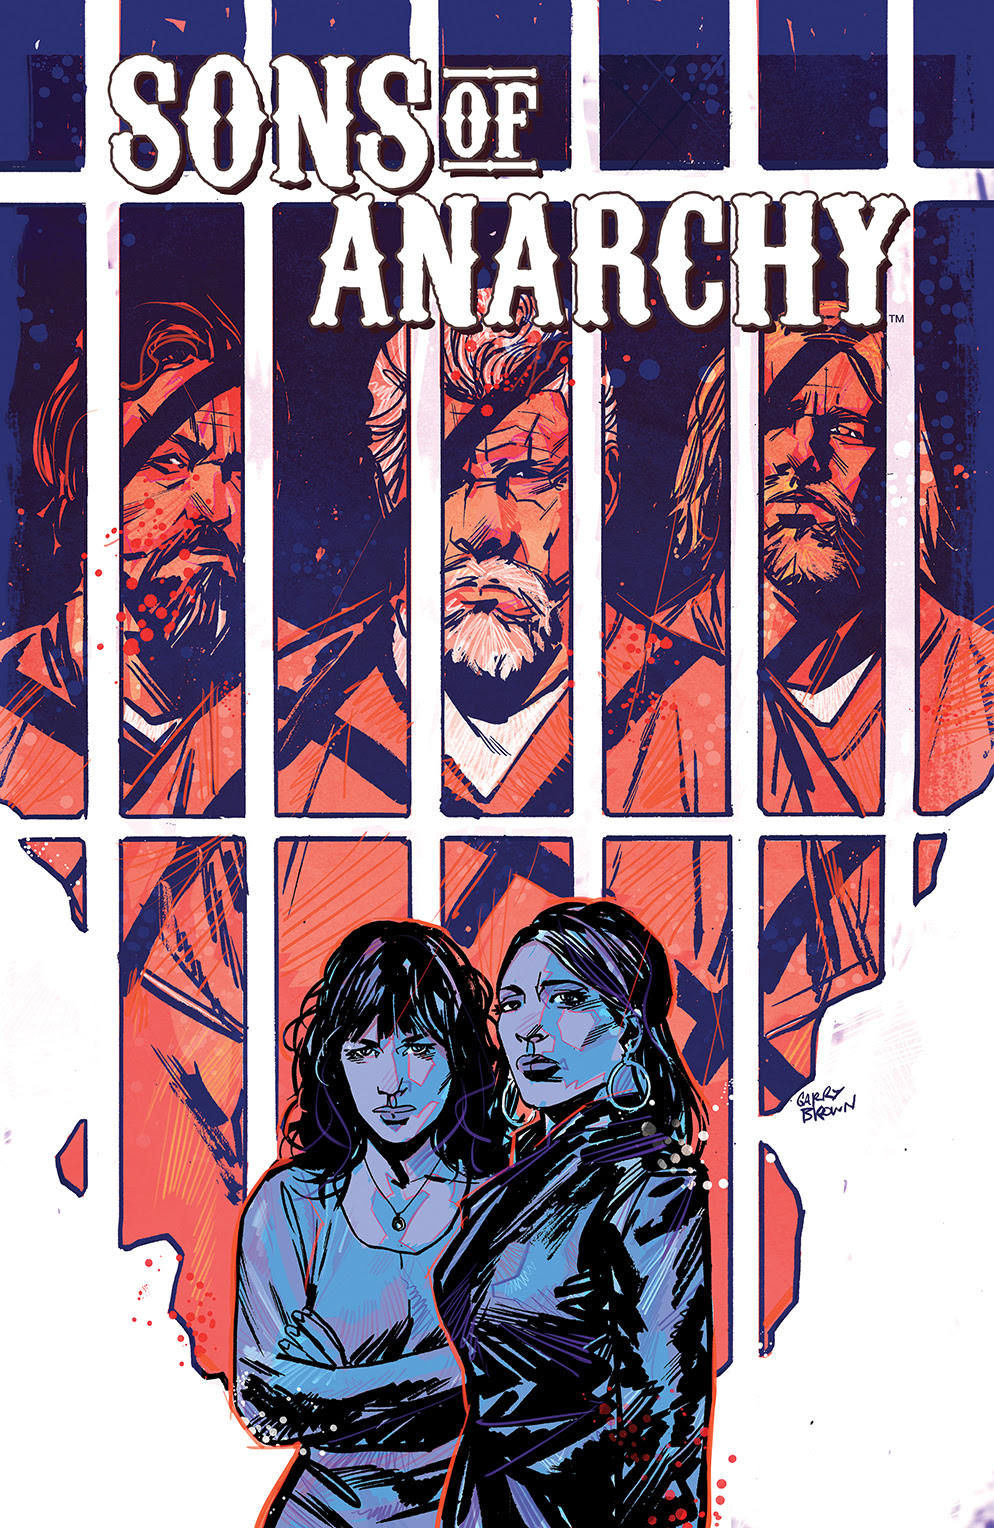 SONS OF ANARCHY #9 Cover by Garry Brown